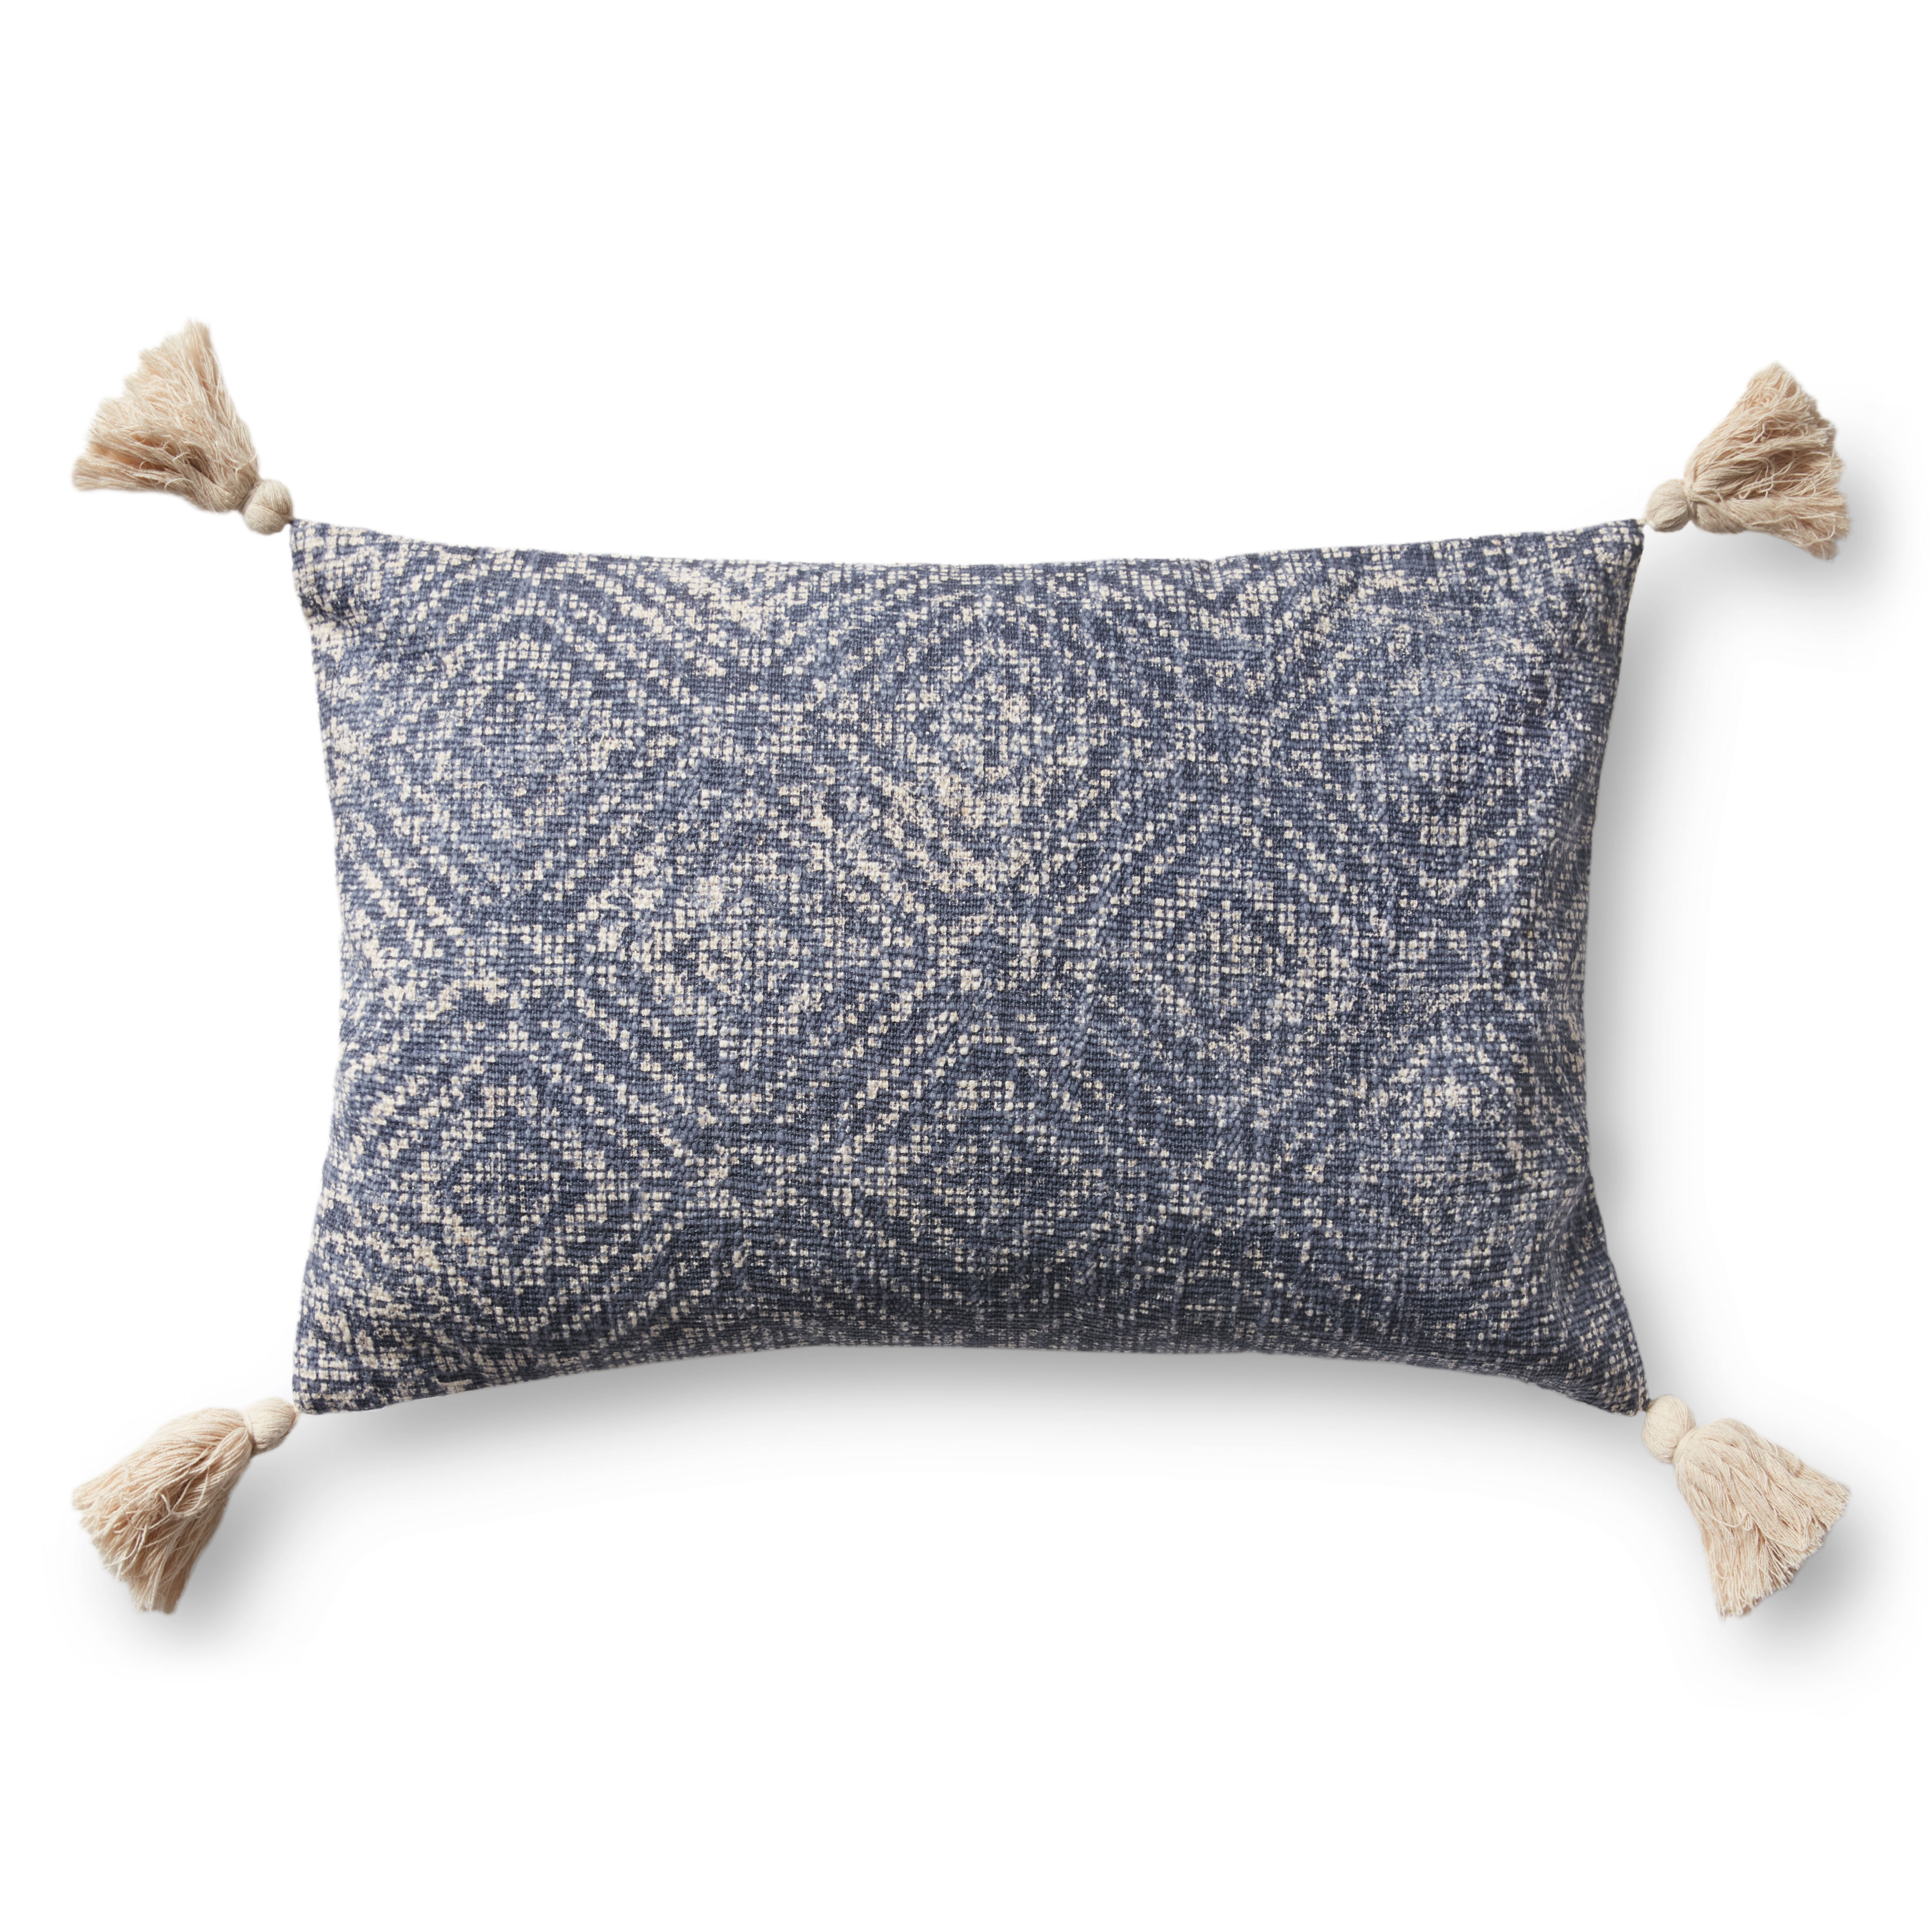 Loloi Pillows P0621 Blue 13" x 21" Cover Only - Loloi Rugs